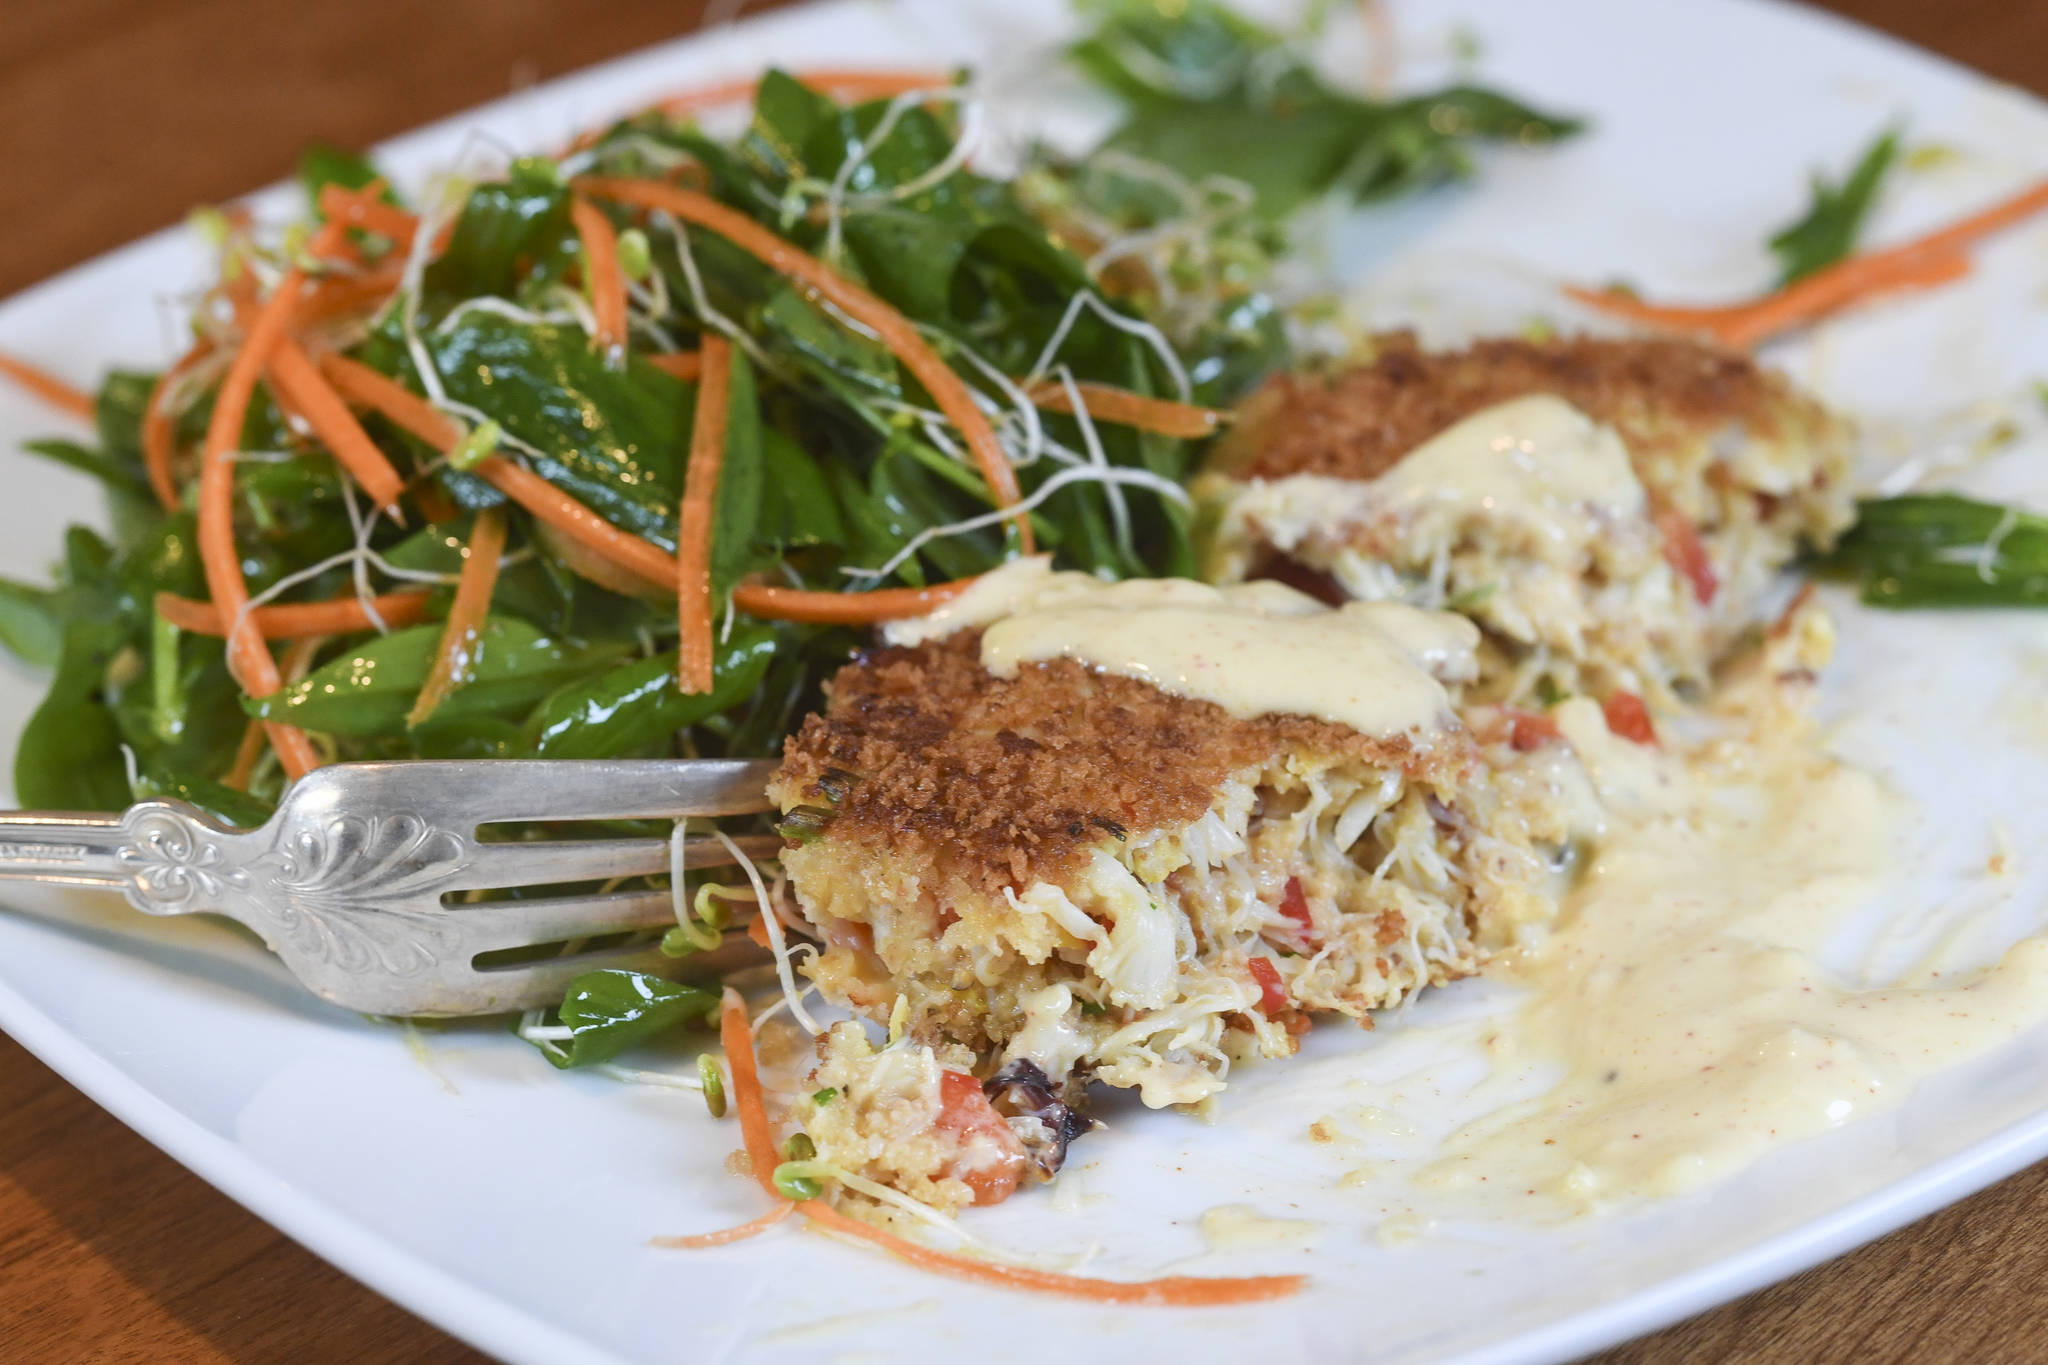 Move over blue crab. Dungeness takes the cake in this crab cake recipe